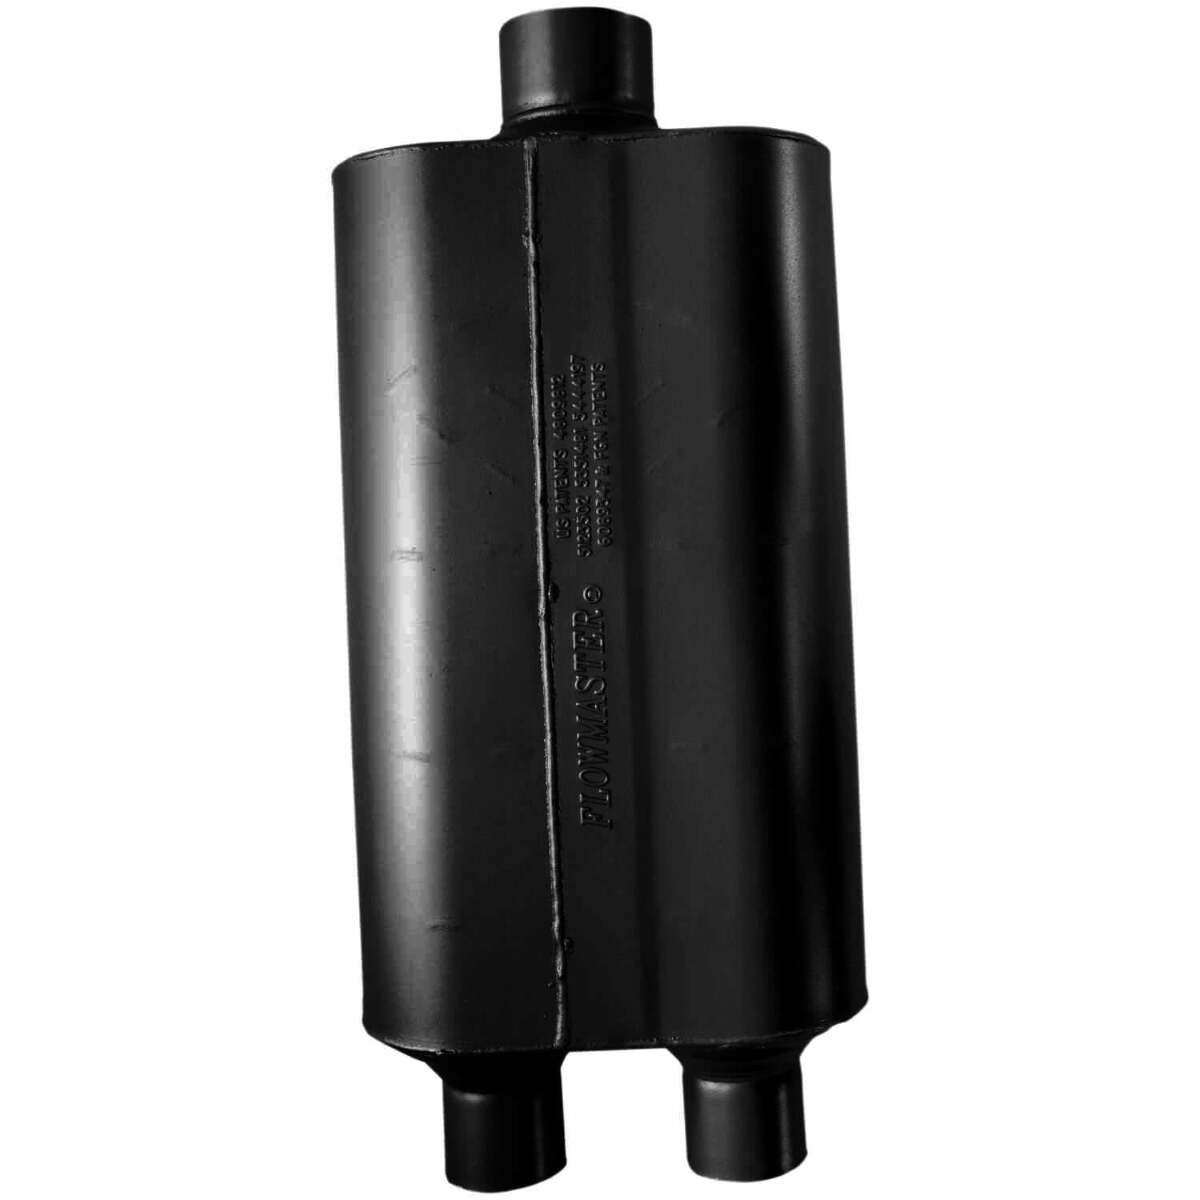 Flowmaster Super 50 Muffler 2.25 Dual In / 3.00 Center Out 8524553